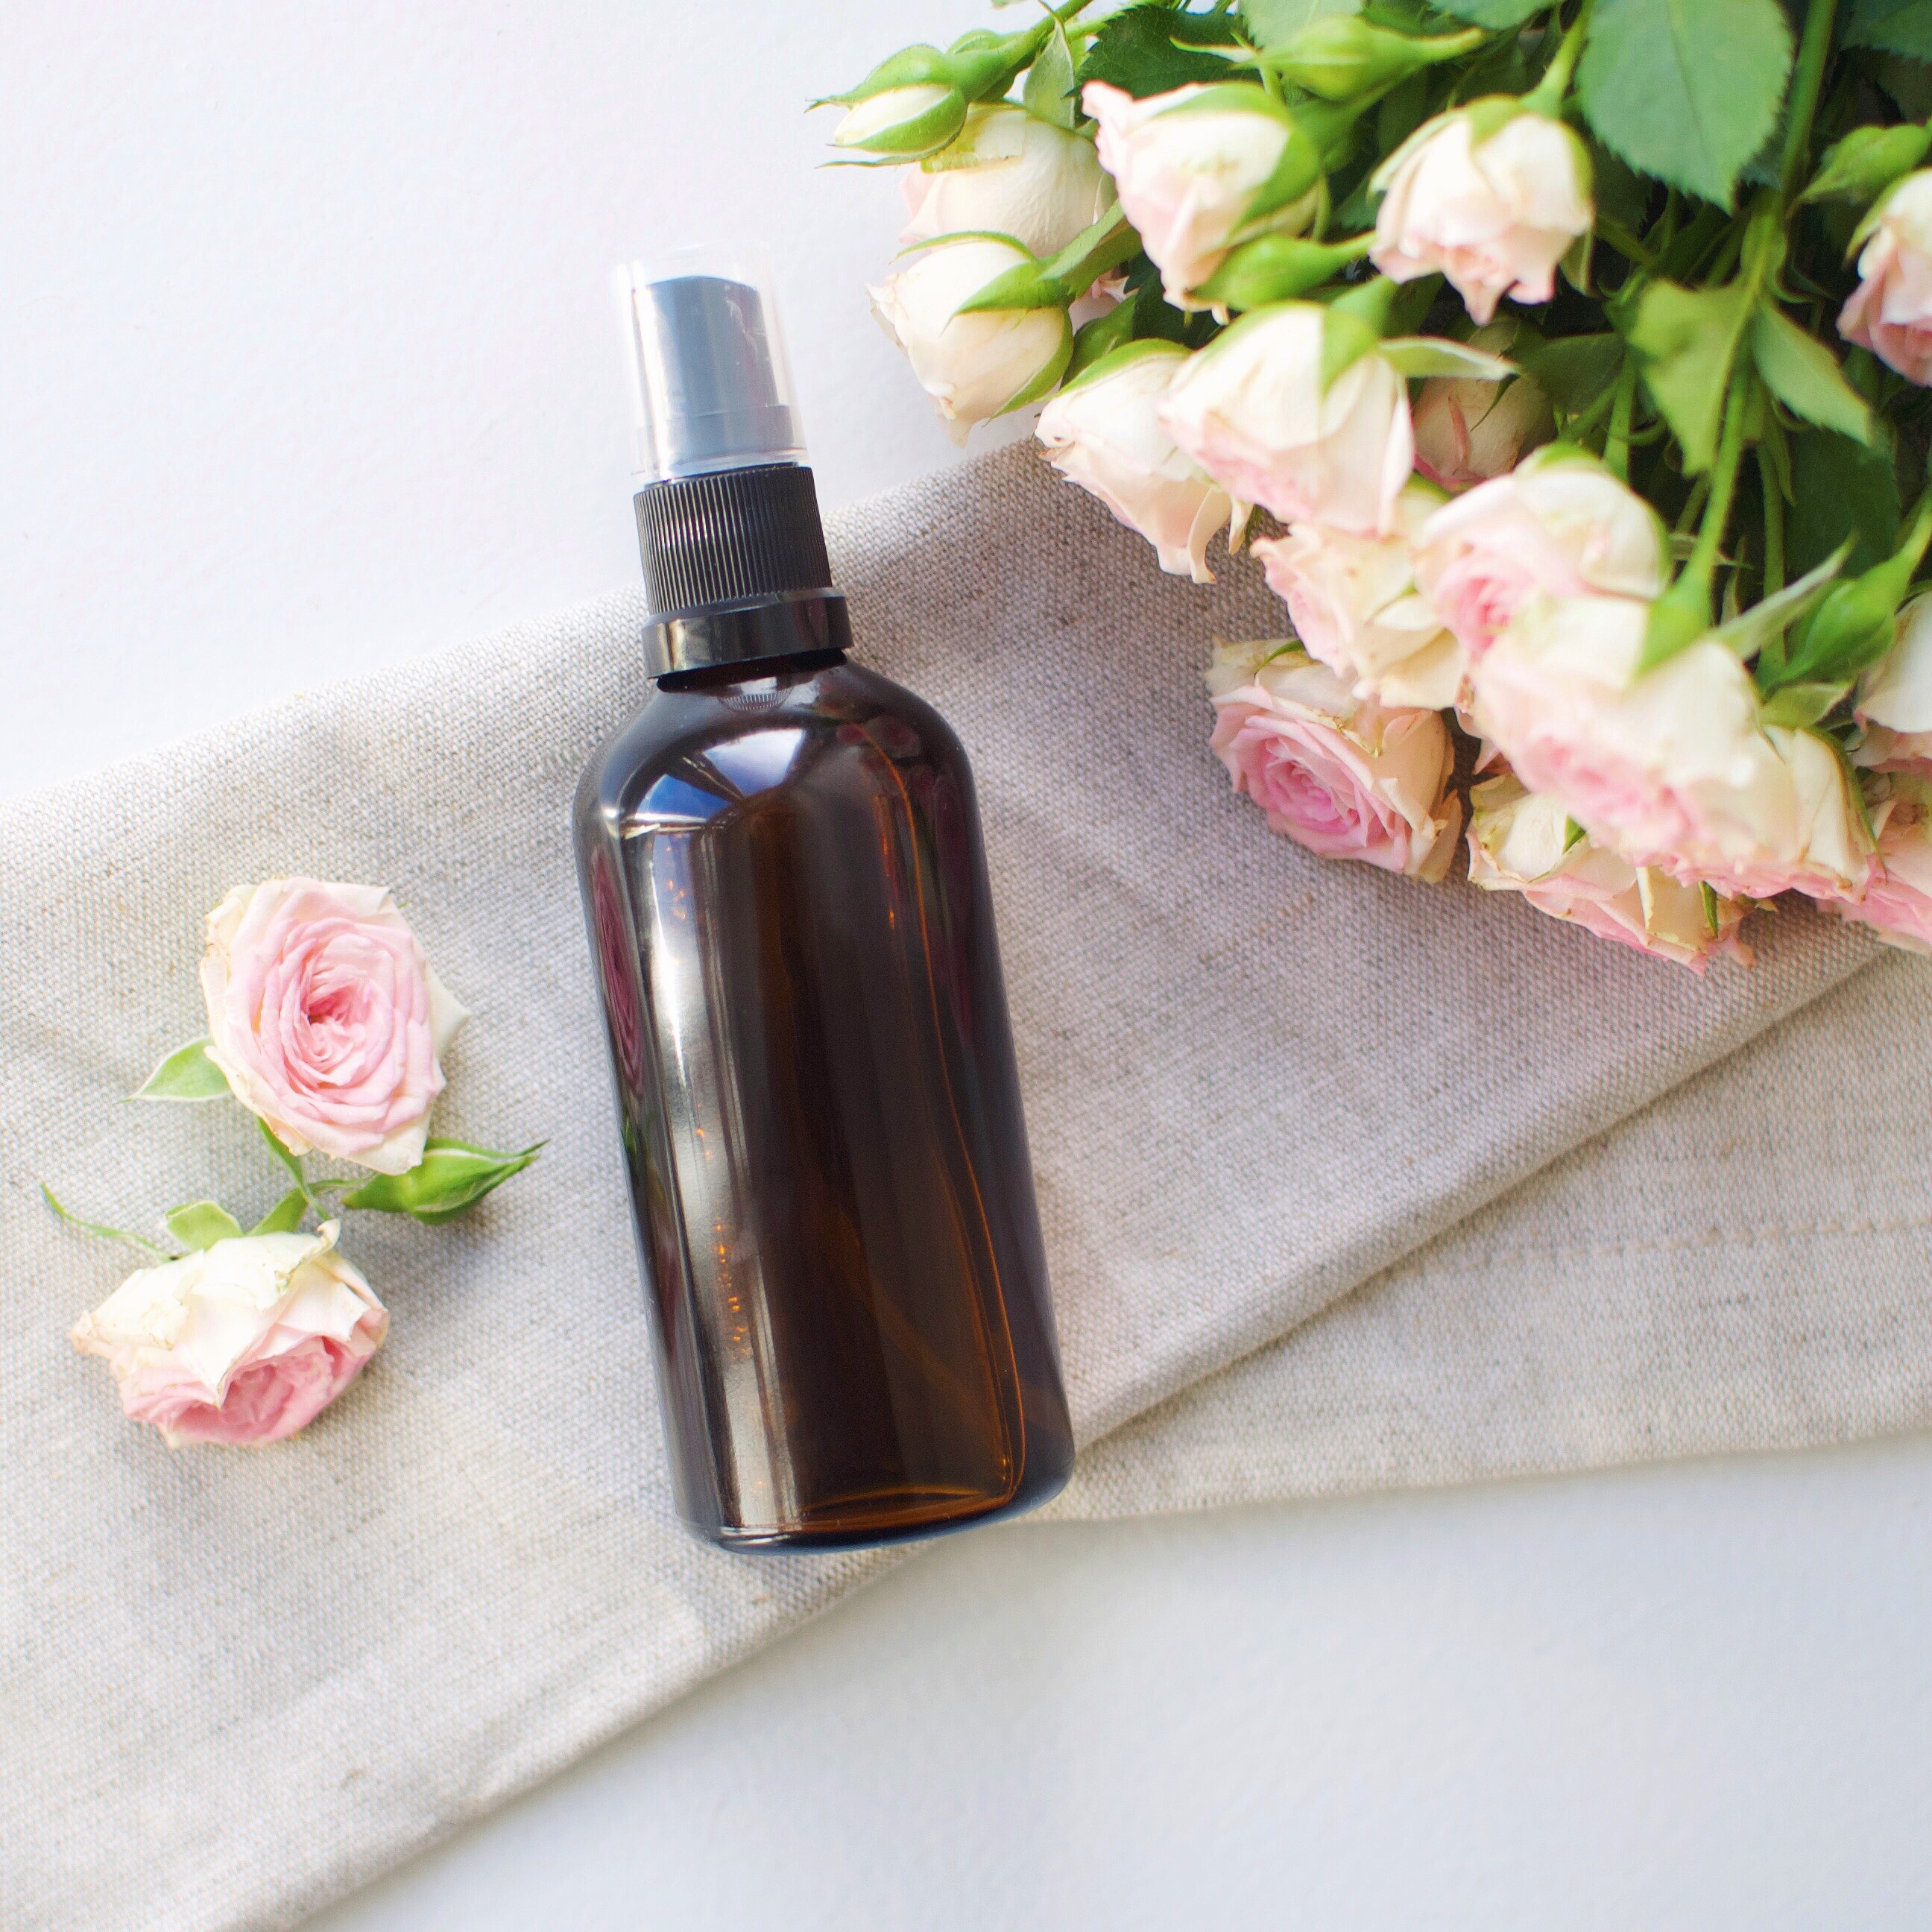 Super easy homemade refreshing and hydrating face mist